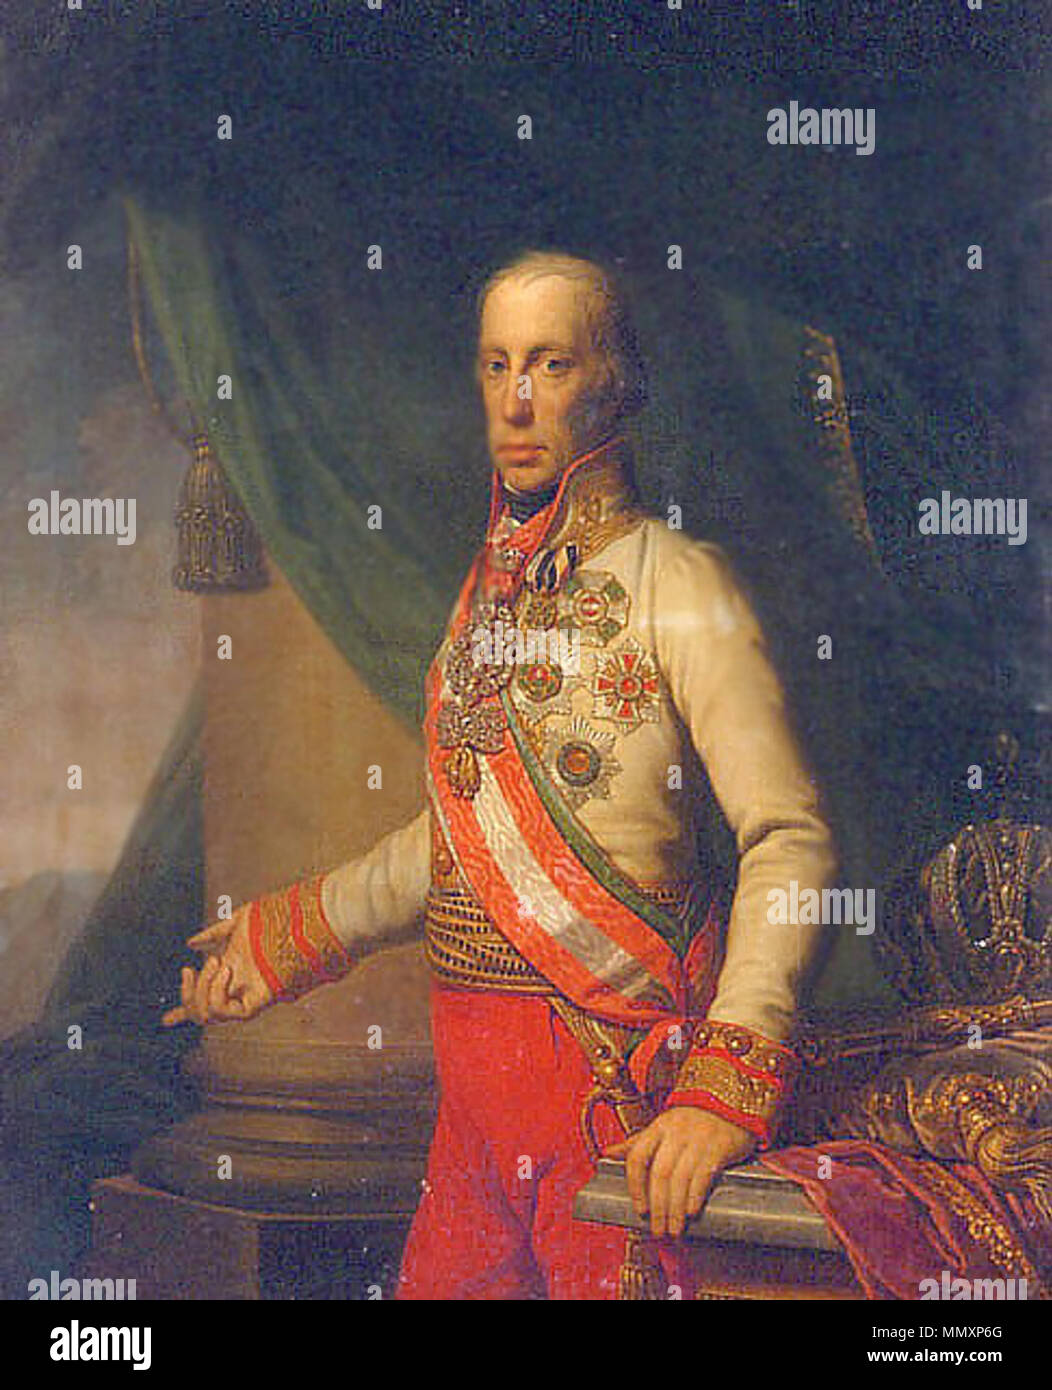 English: Emperor Franz I of Austria (Franz II of the Holy Roman Empire),  wearing the uniform of a Field Marshal in the Austrian Army . 19th century.  Franz I (II) half-length